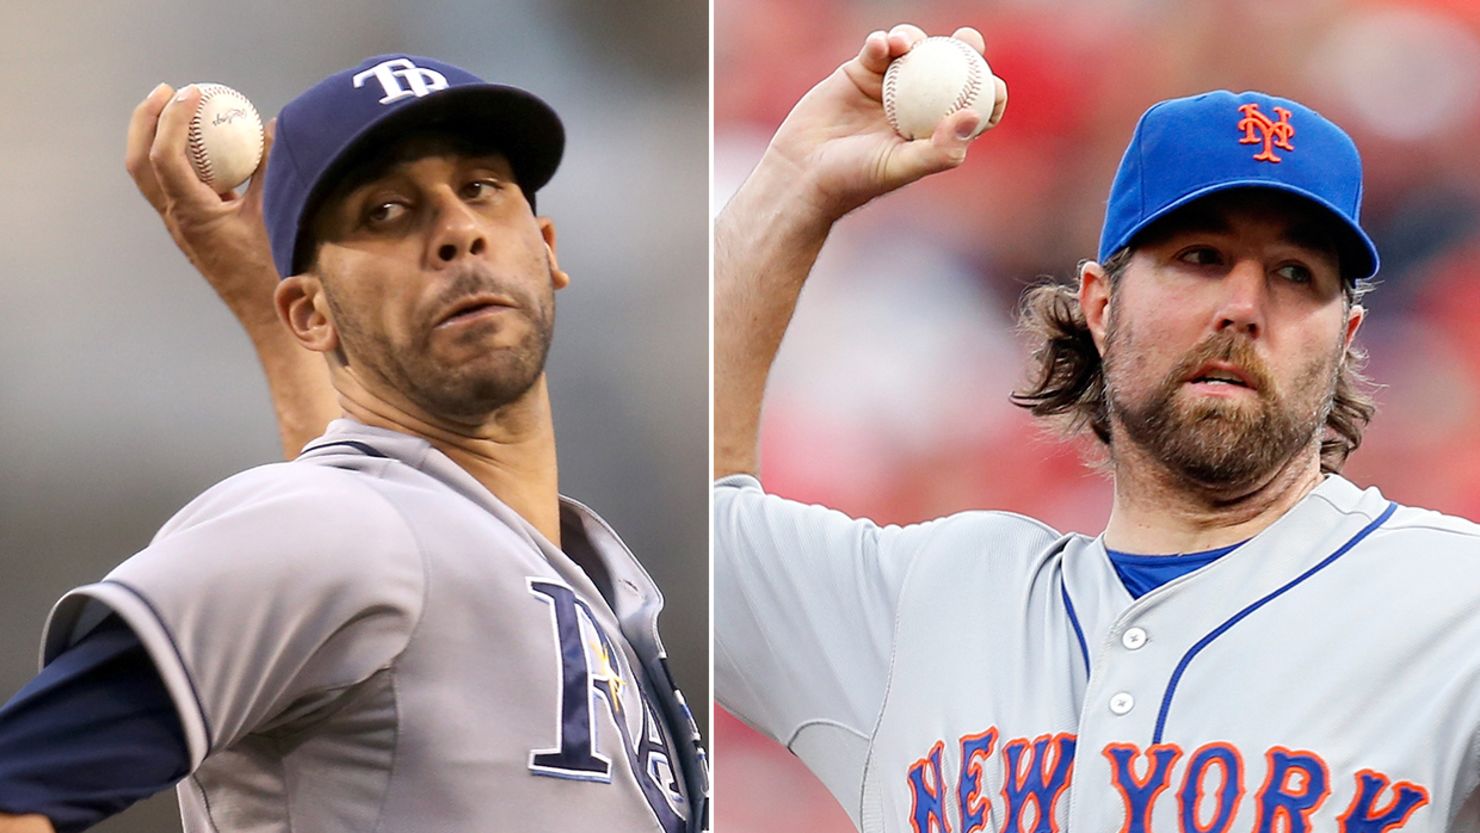 David Price of the Tampa Bay Rays and R.A. Dickey of the New York Mets were voted the best pitchers in the majors.